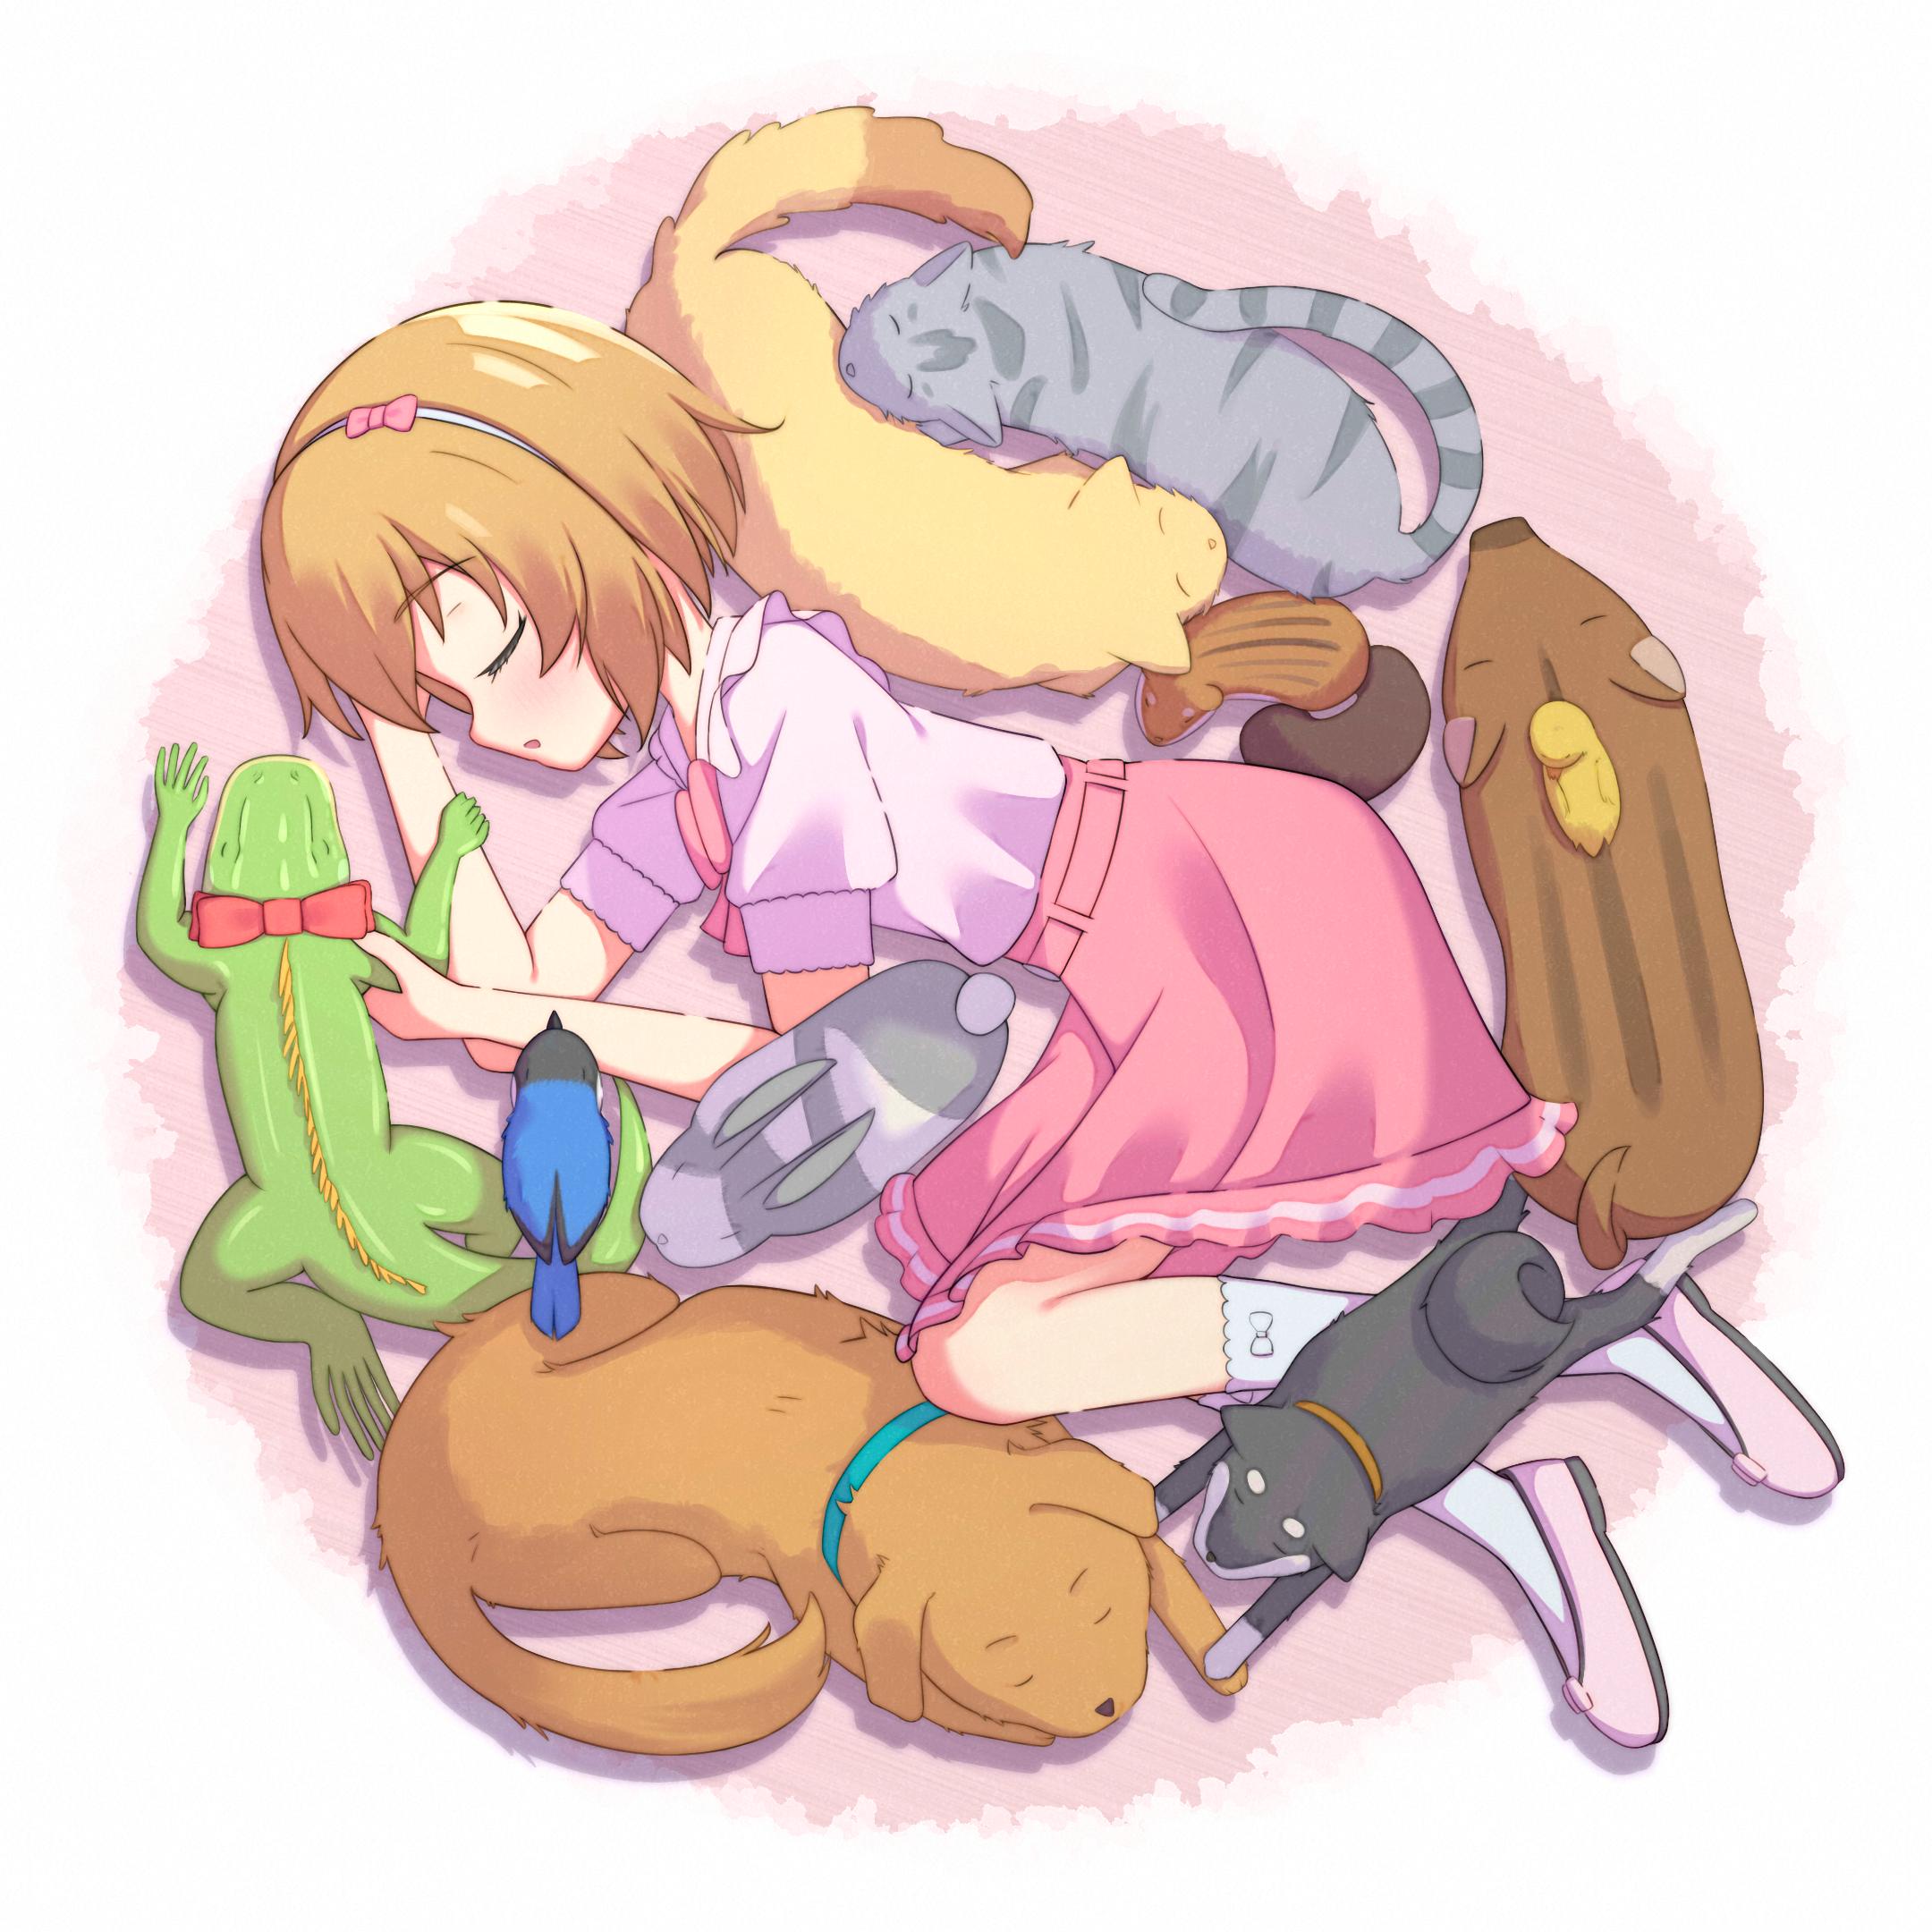 Digital drawing of girl sleeping, surrounded by small animals